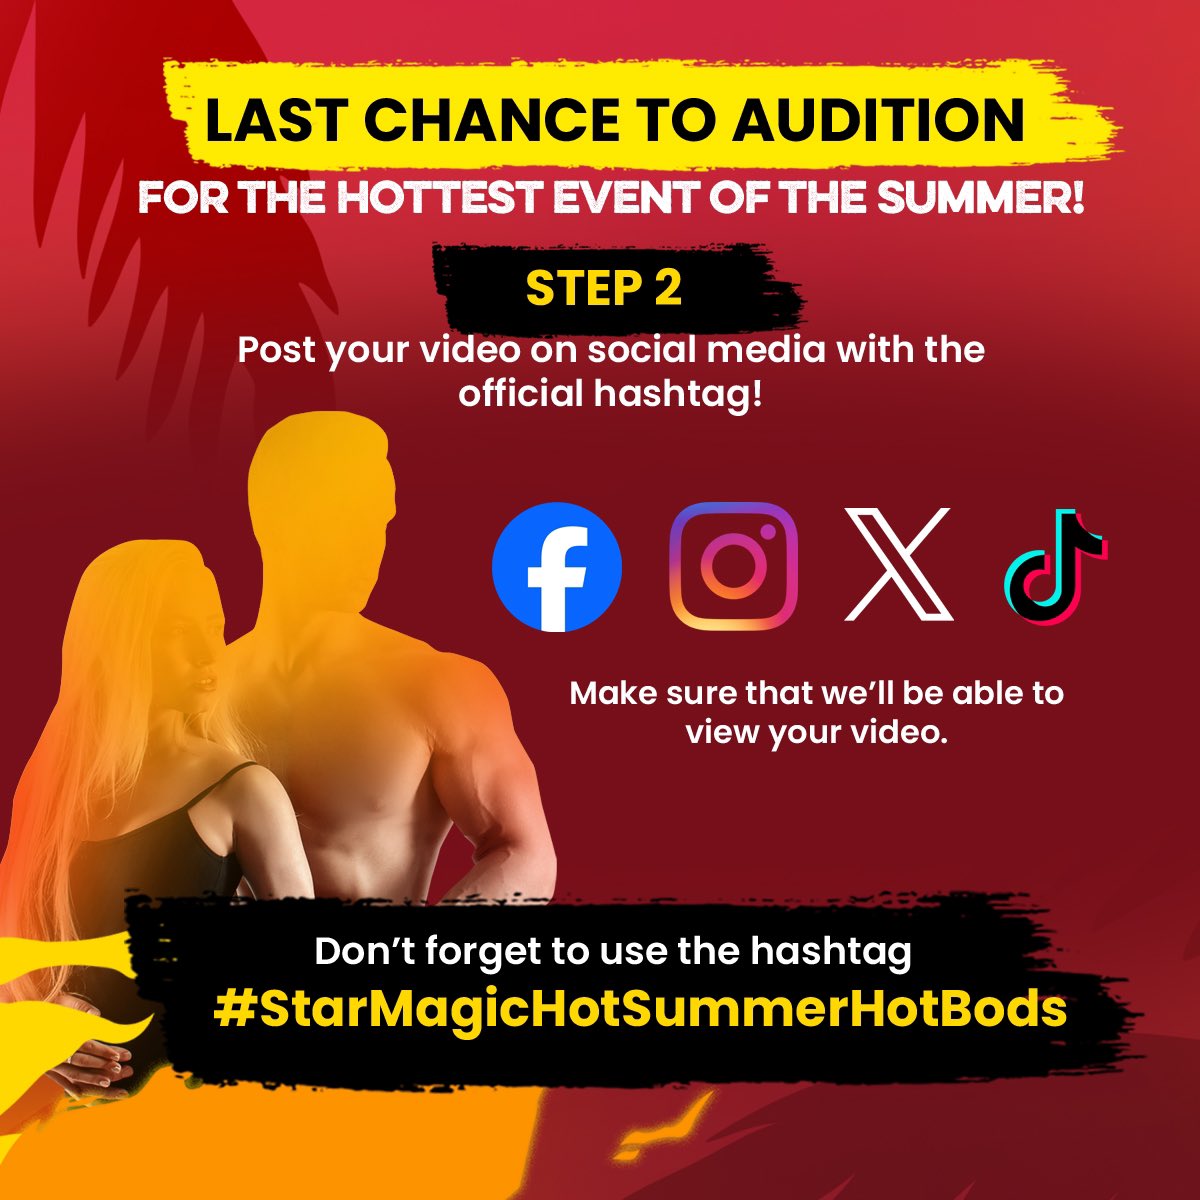 Today is your LAST CHANCE TO AUDITION! 🔥

Post a video showcasing your hot bod & personality with the hashtag #StarMagicHotSummerHotBods on FB, IG, X, TikTok, and be one of the faces—and bodies—of the hottest event this May along with Star Magic artists!